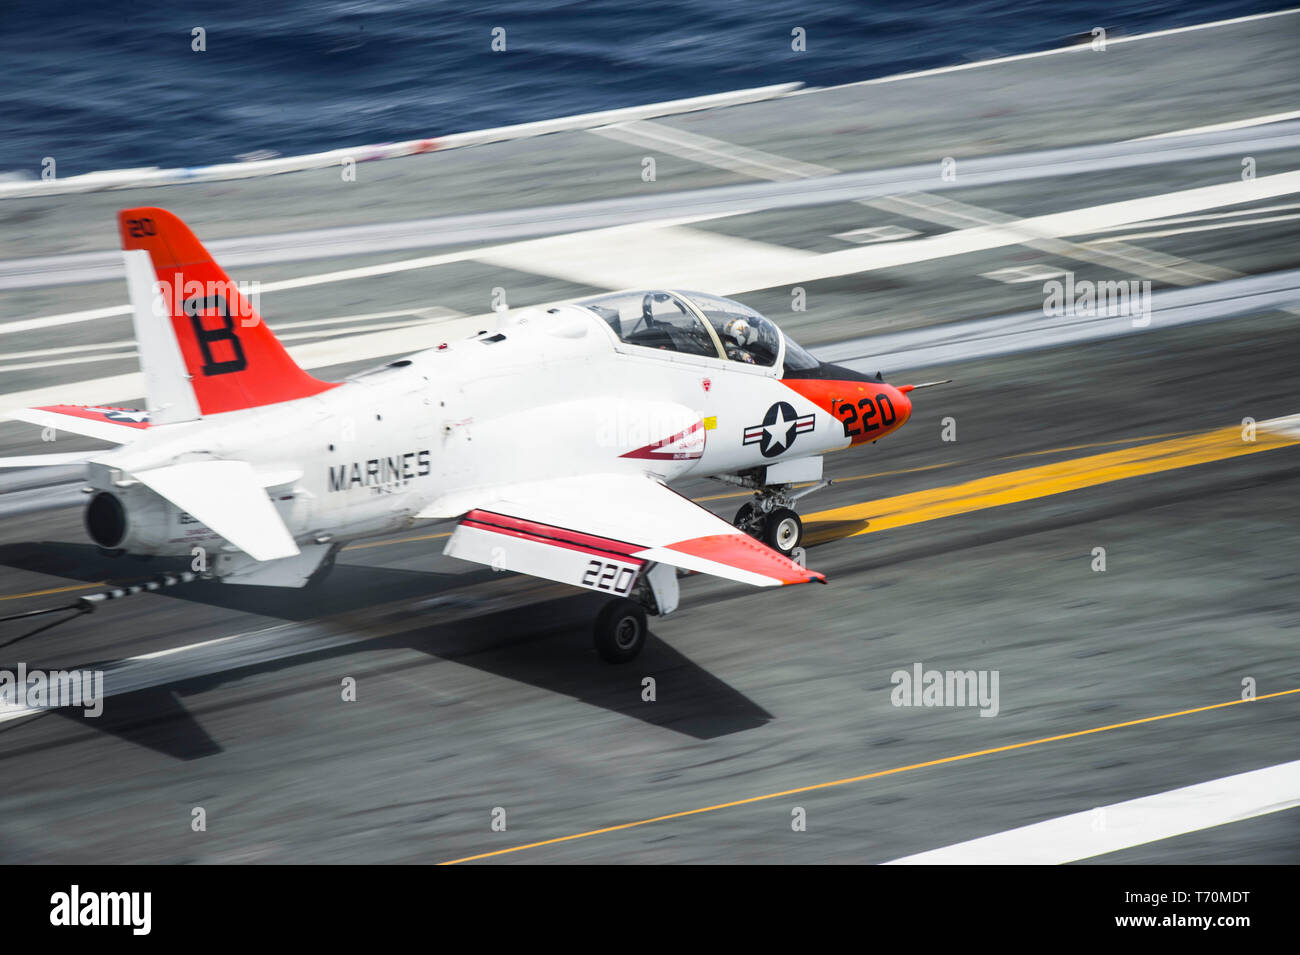 190502-N-KT825-0141  ATLANTIC OCEAN (May 2, 2019) A T-45C Goshawk training aircraft assigned to Training Air Wing (TW) 2 lands on the flight deck aboard the aircraft carrier USS Dwight D. Eisenhower (CVN 69). Ike is underway in the Atlantic Ocean conducting carrier qualifications while in the basic phase of the Optimized Fleet Response Plan. (U.S. Navy photo by Mass Communication Specialist Seaman Sawyer Haskins) Stock Photo